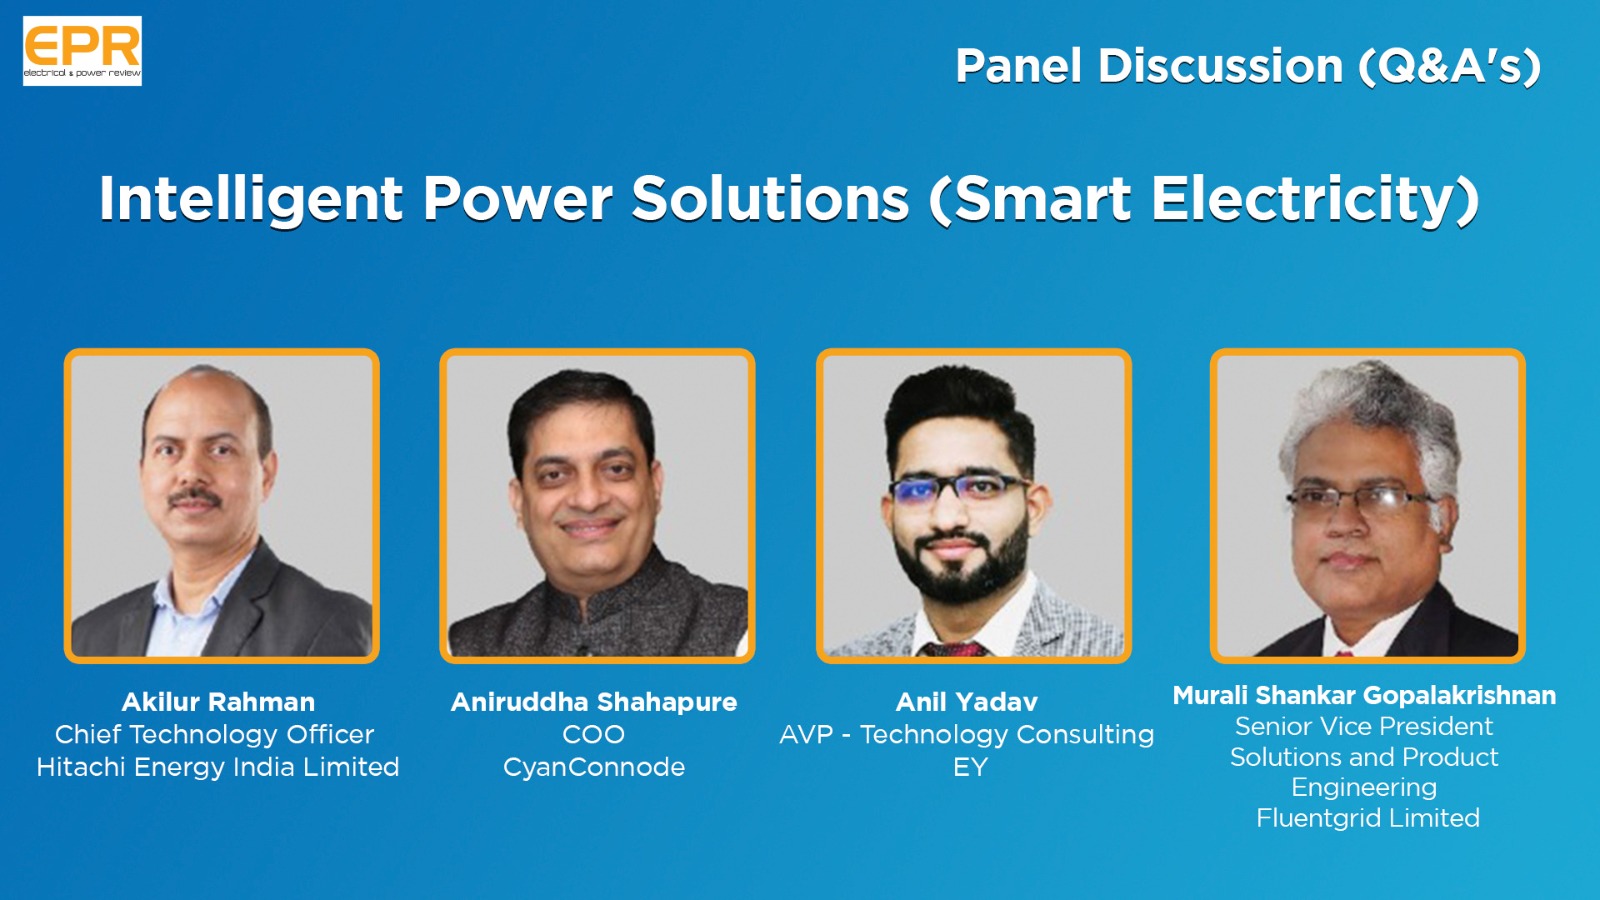 Intelligent Power Solutions (Smart Electricity) | Panel Discussion | EPR Magazine